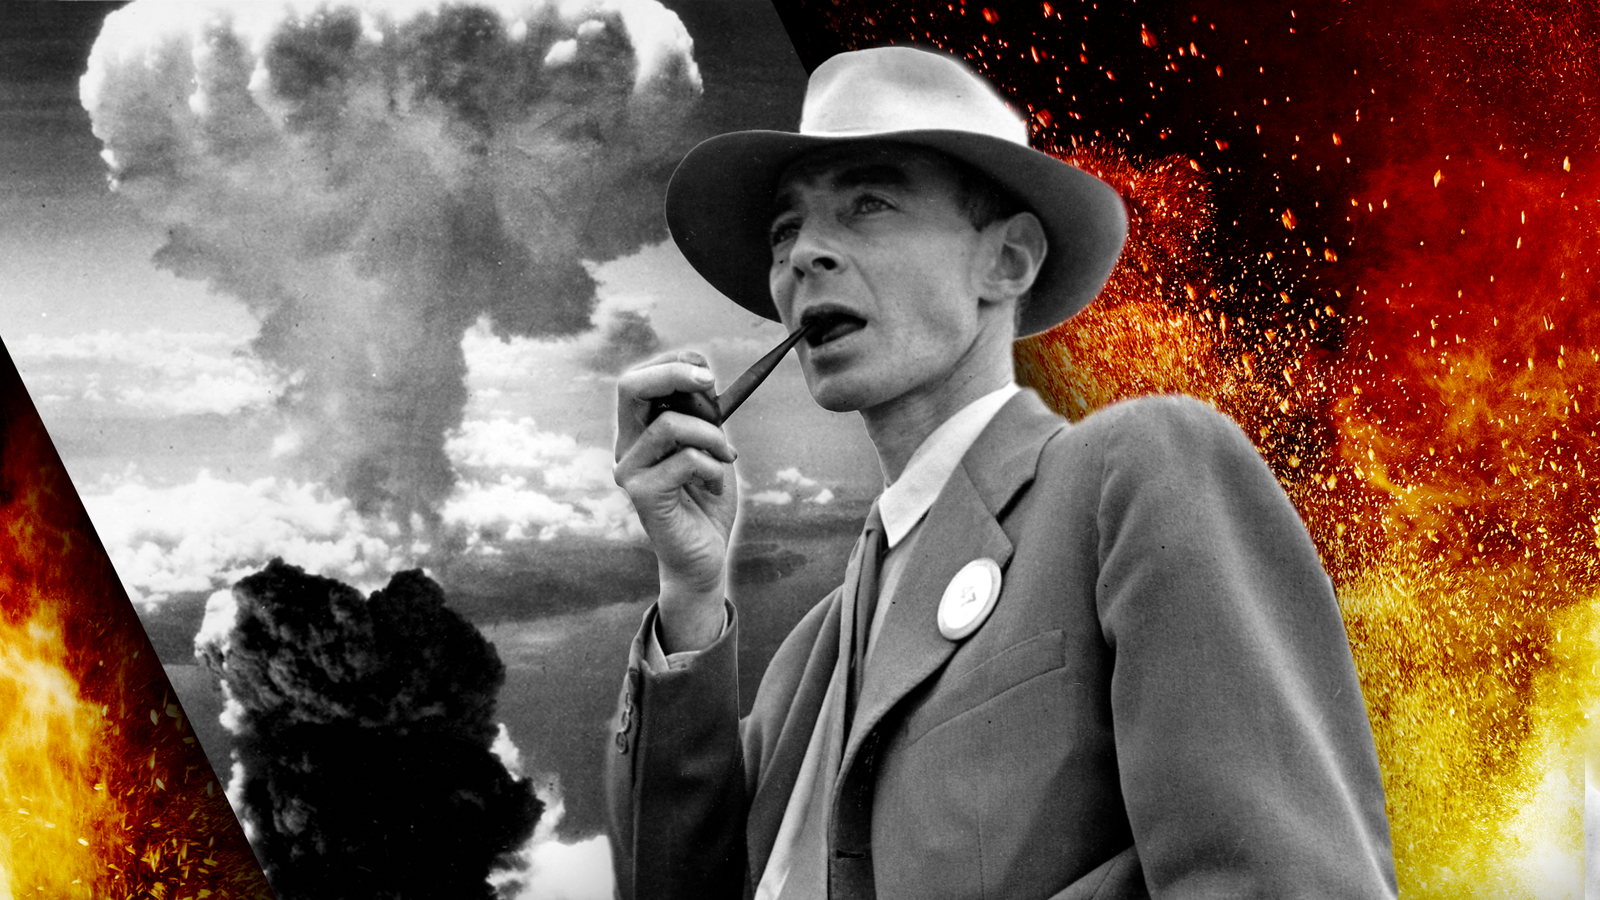 Oppenheimer: The 'destroyer of worlds' who built the atomic bomb - and how his legacy still impacts us today